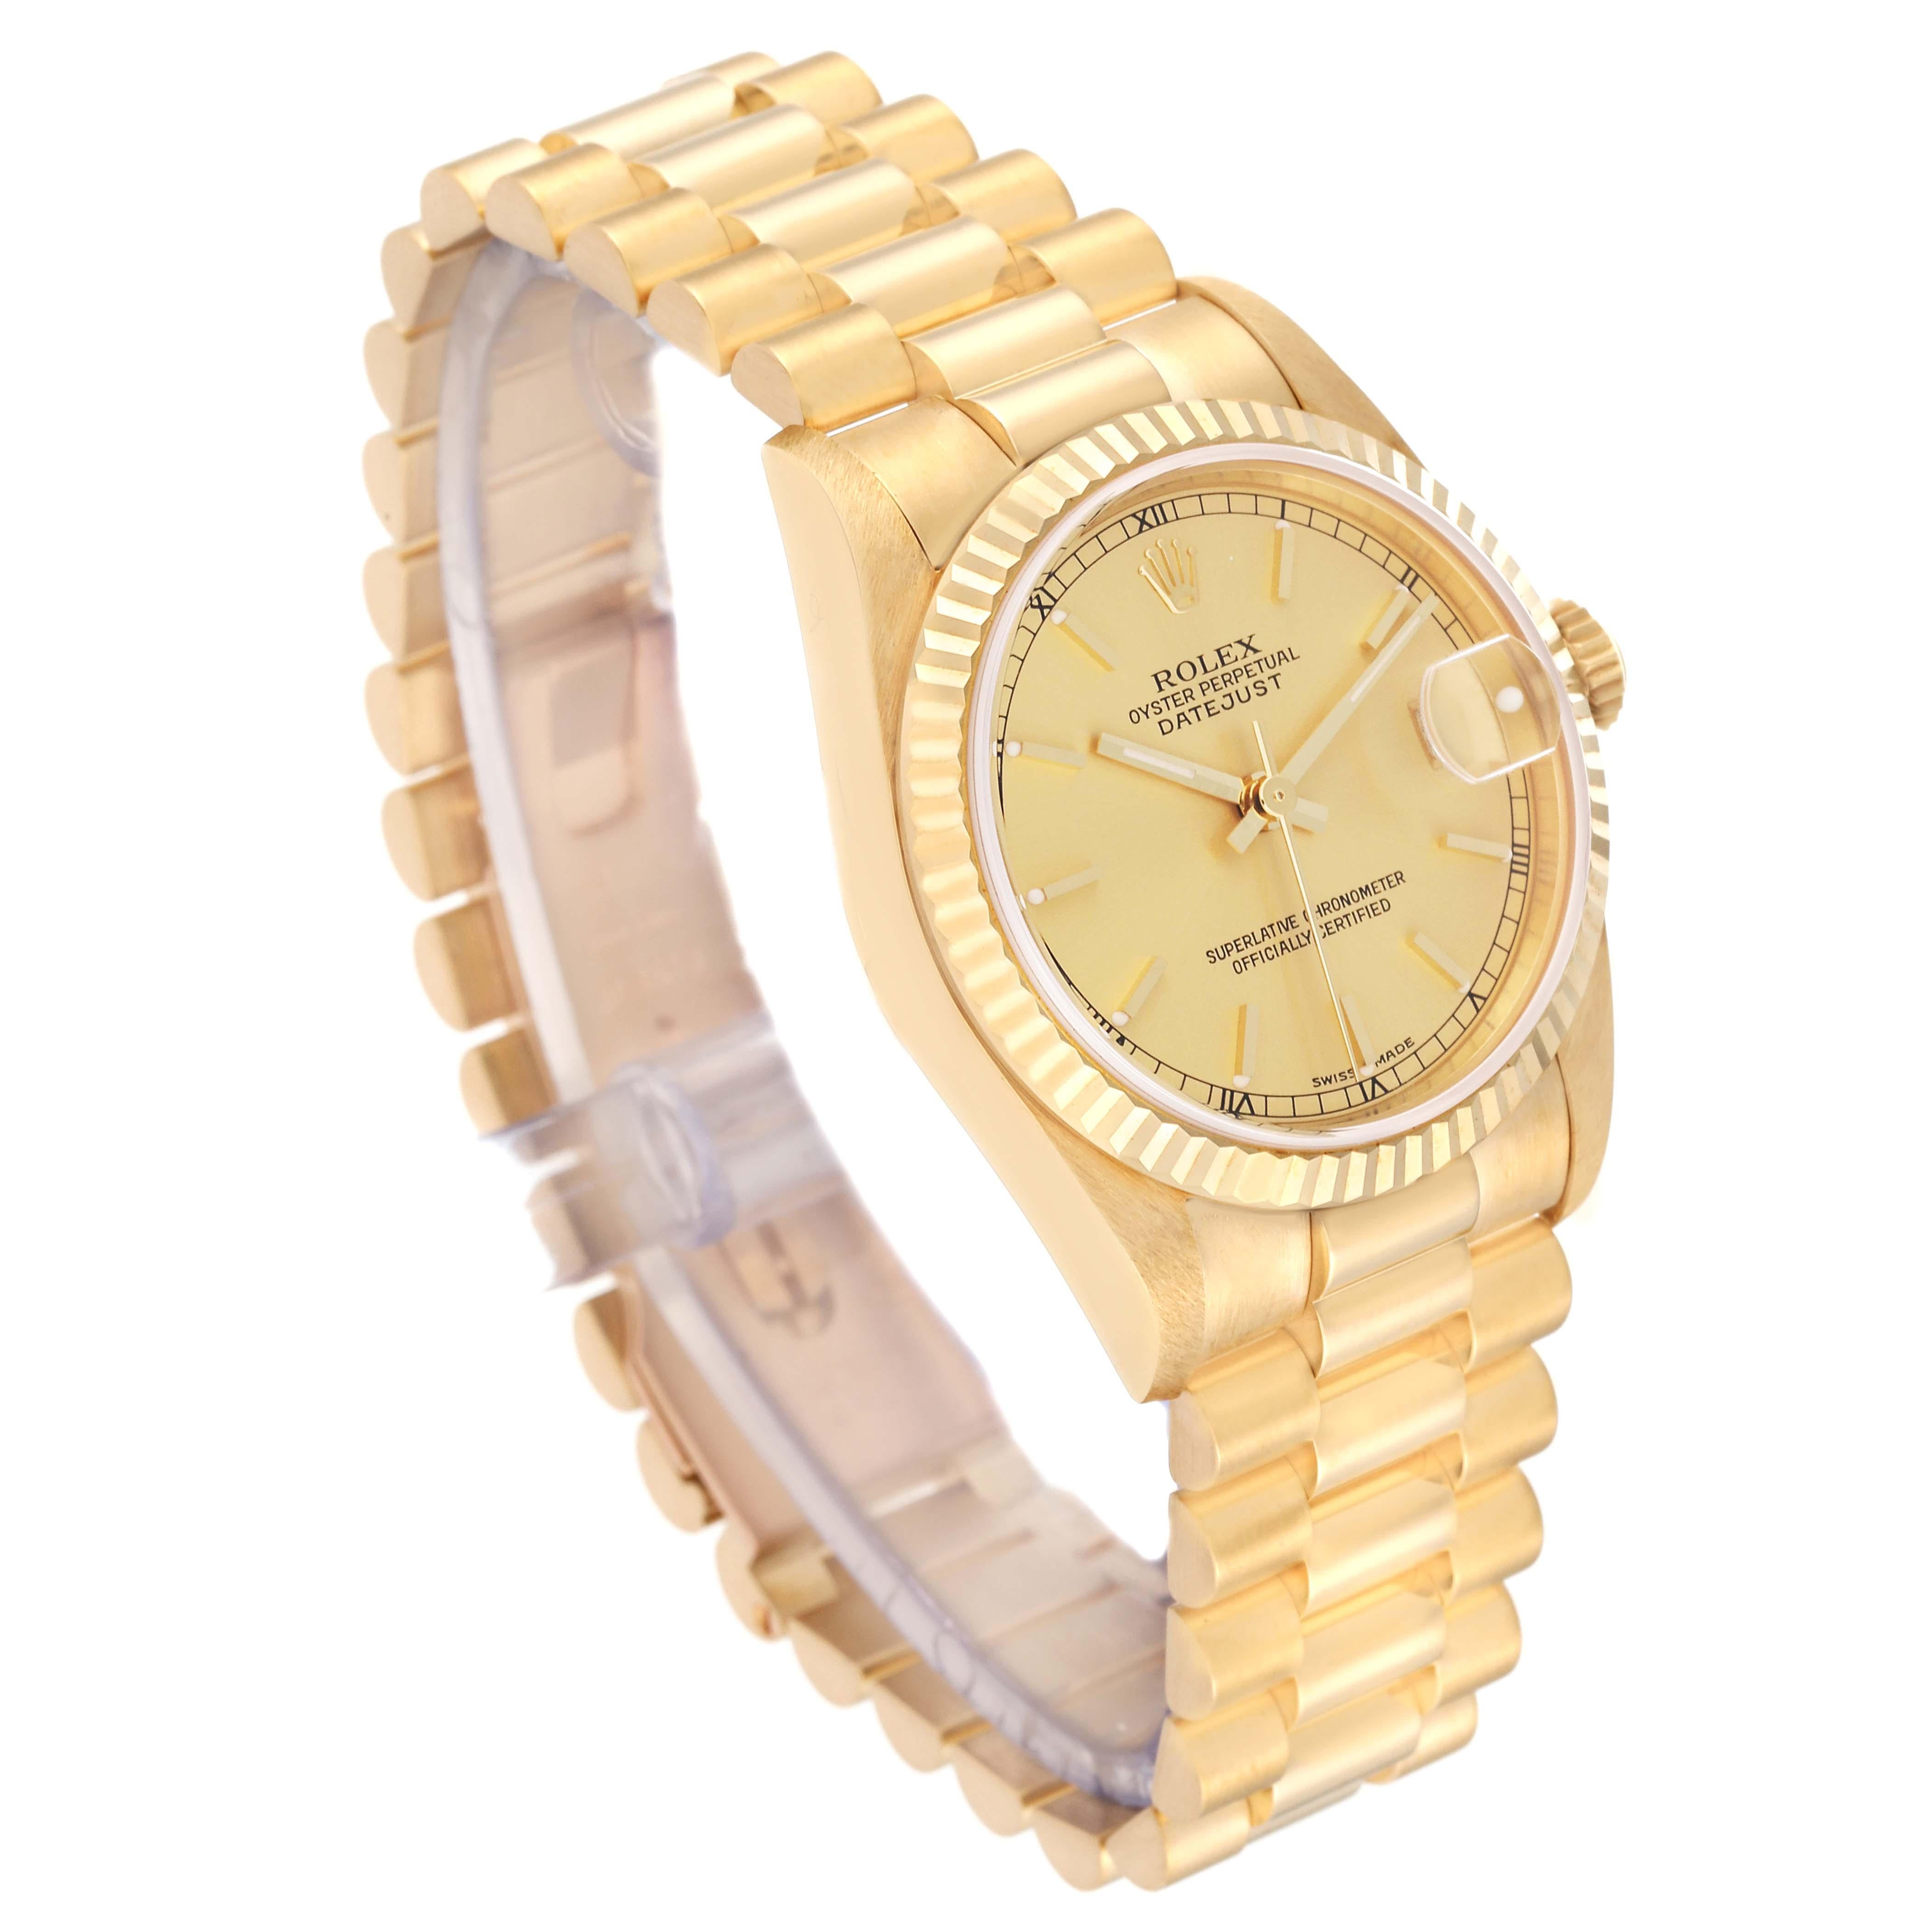 Rolex Datejust President Midsize Yellow Gold Ladies Watch 78278 In Excellent Condition For Sale In Atlanta, GA